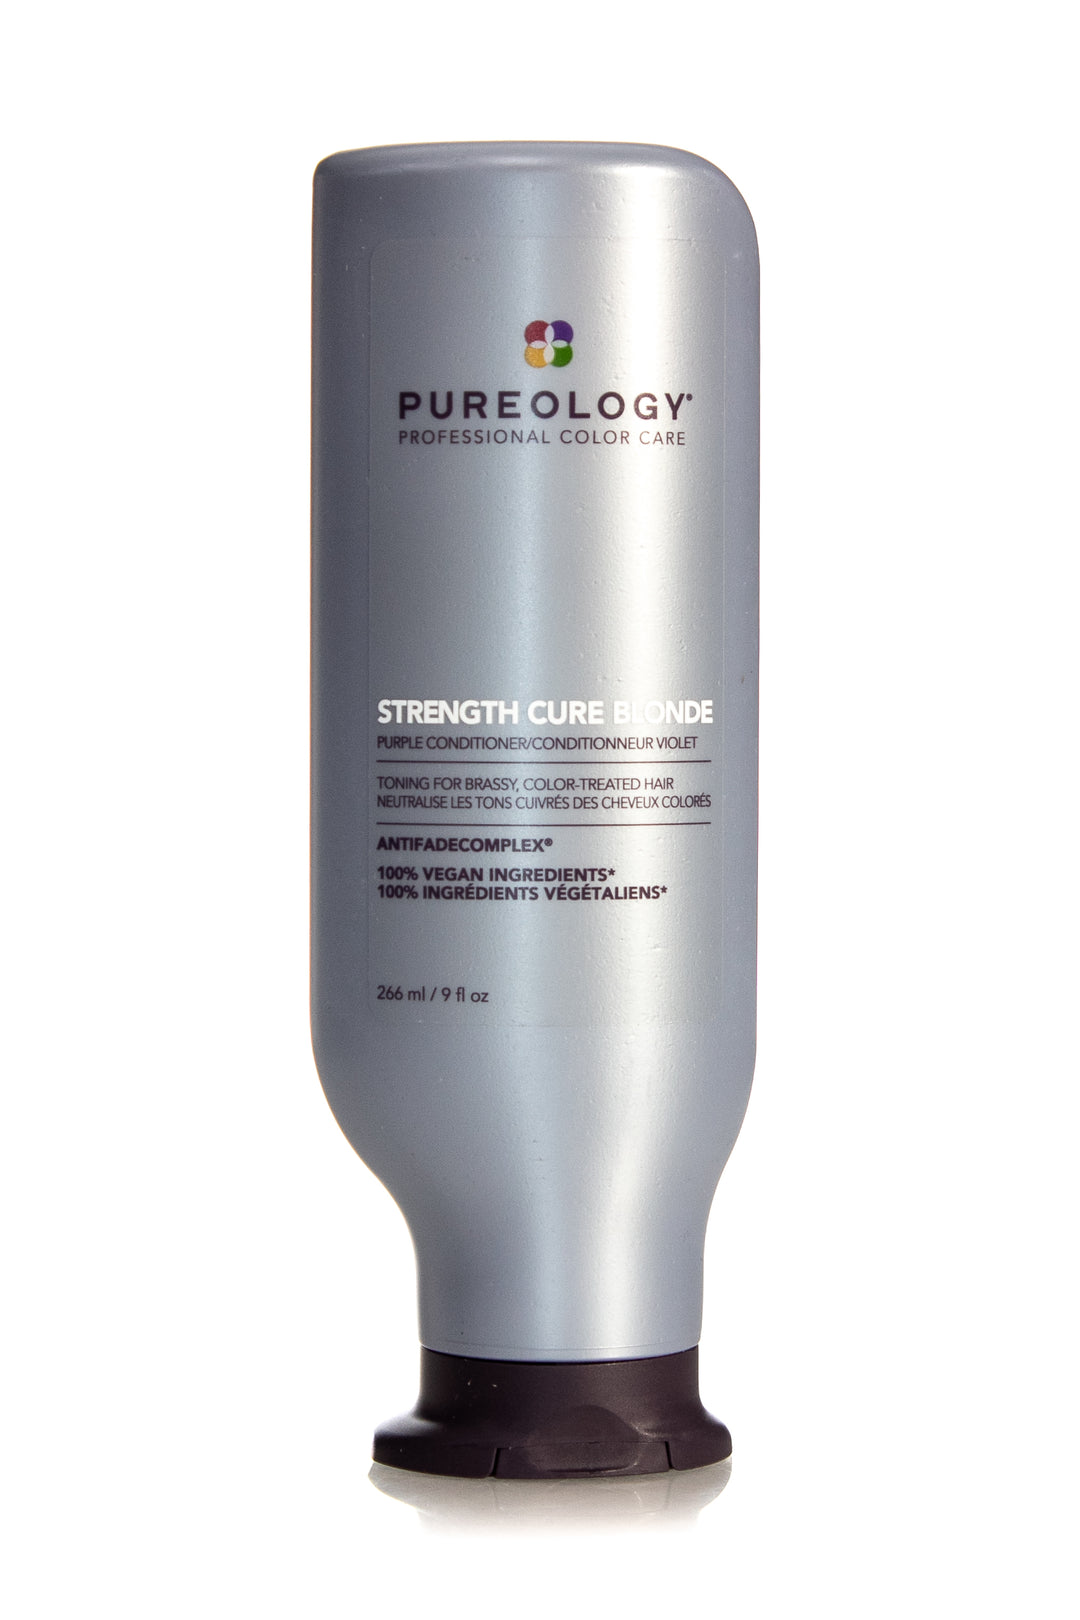 PUREOLOGY Strength Cure Blonde Purple Conditioner | 266ml